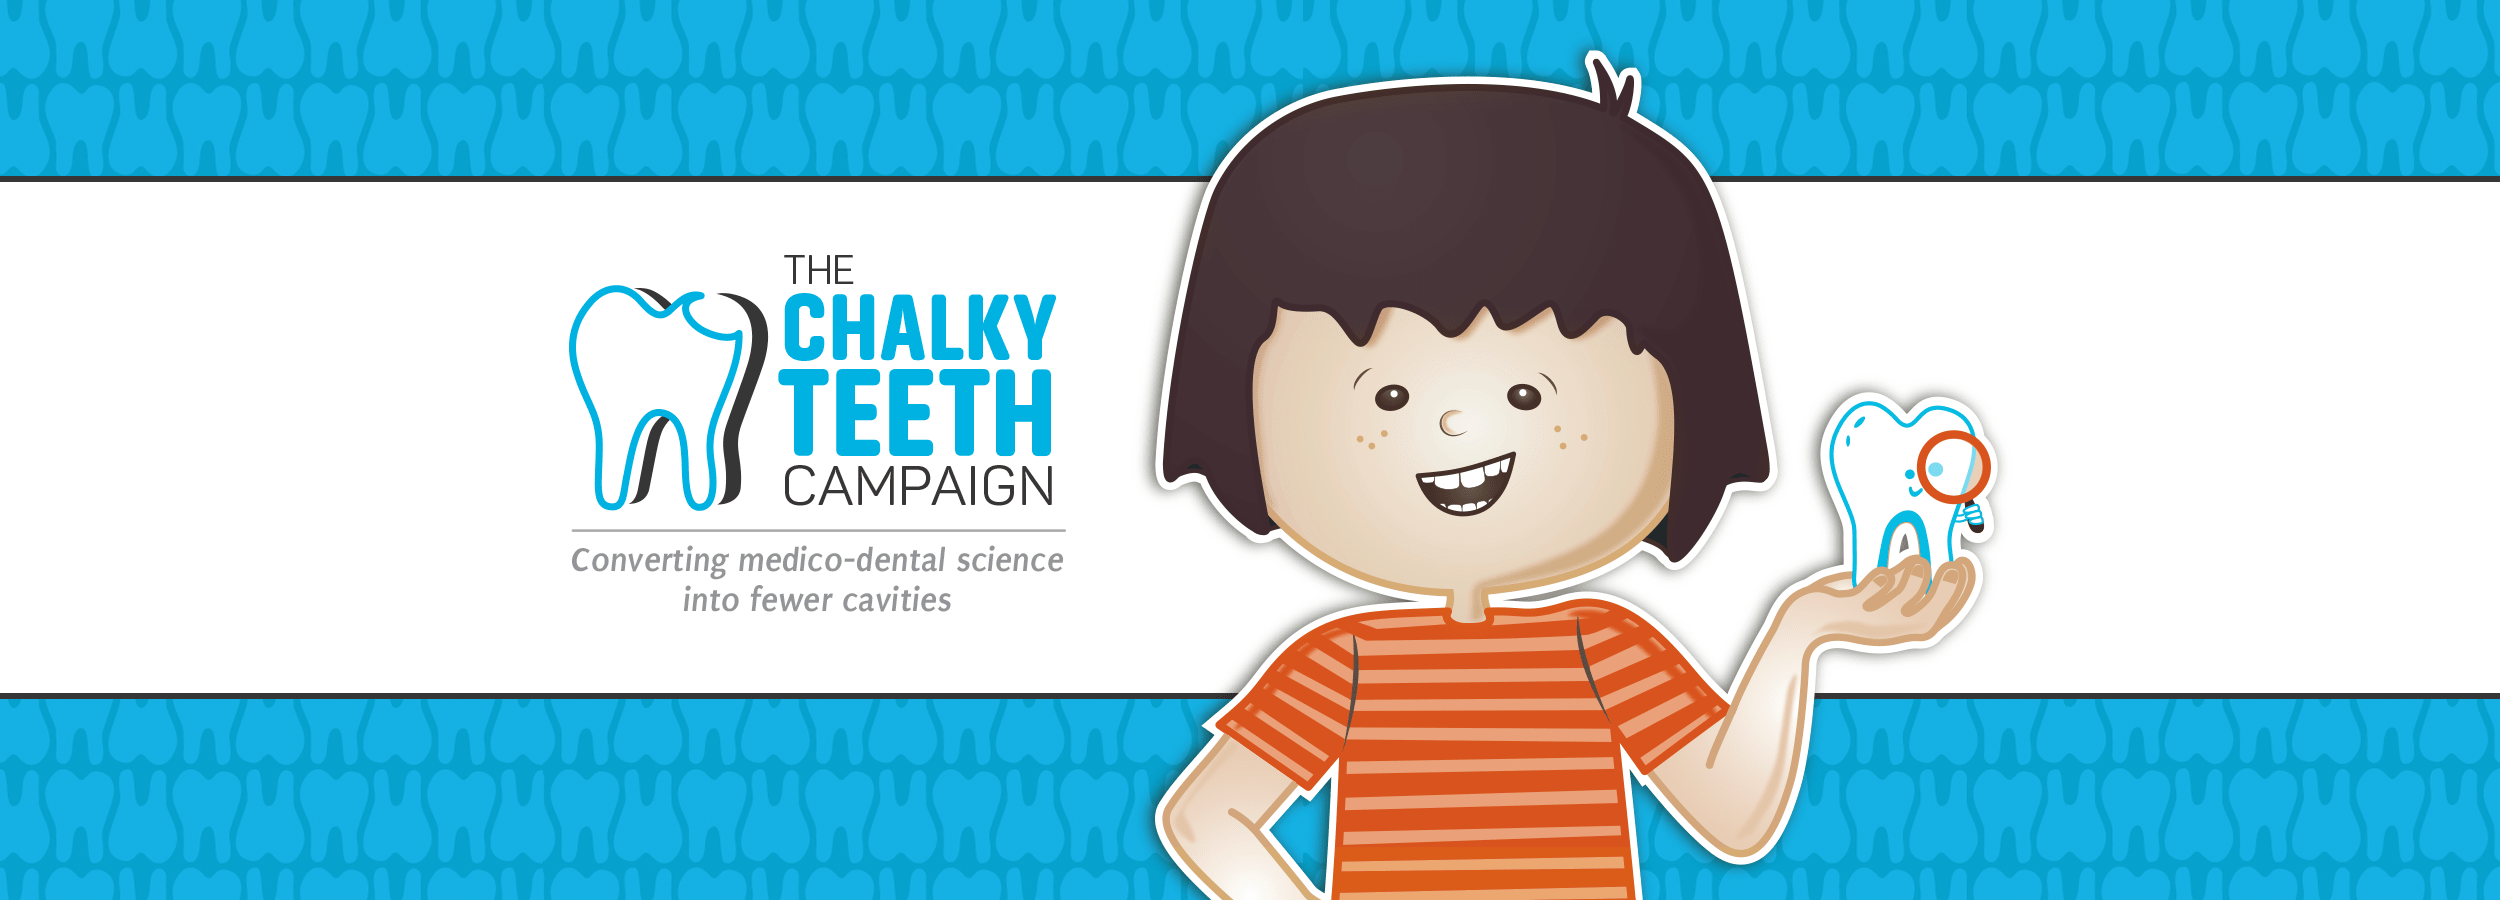 The Chalky Teeth Campaign - Converting medico-dental science into fewer cavities - Main Banner Image